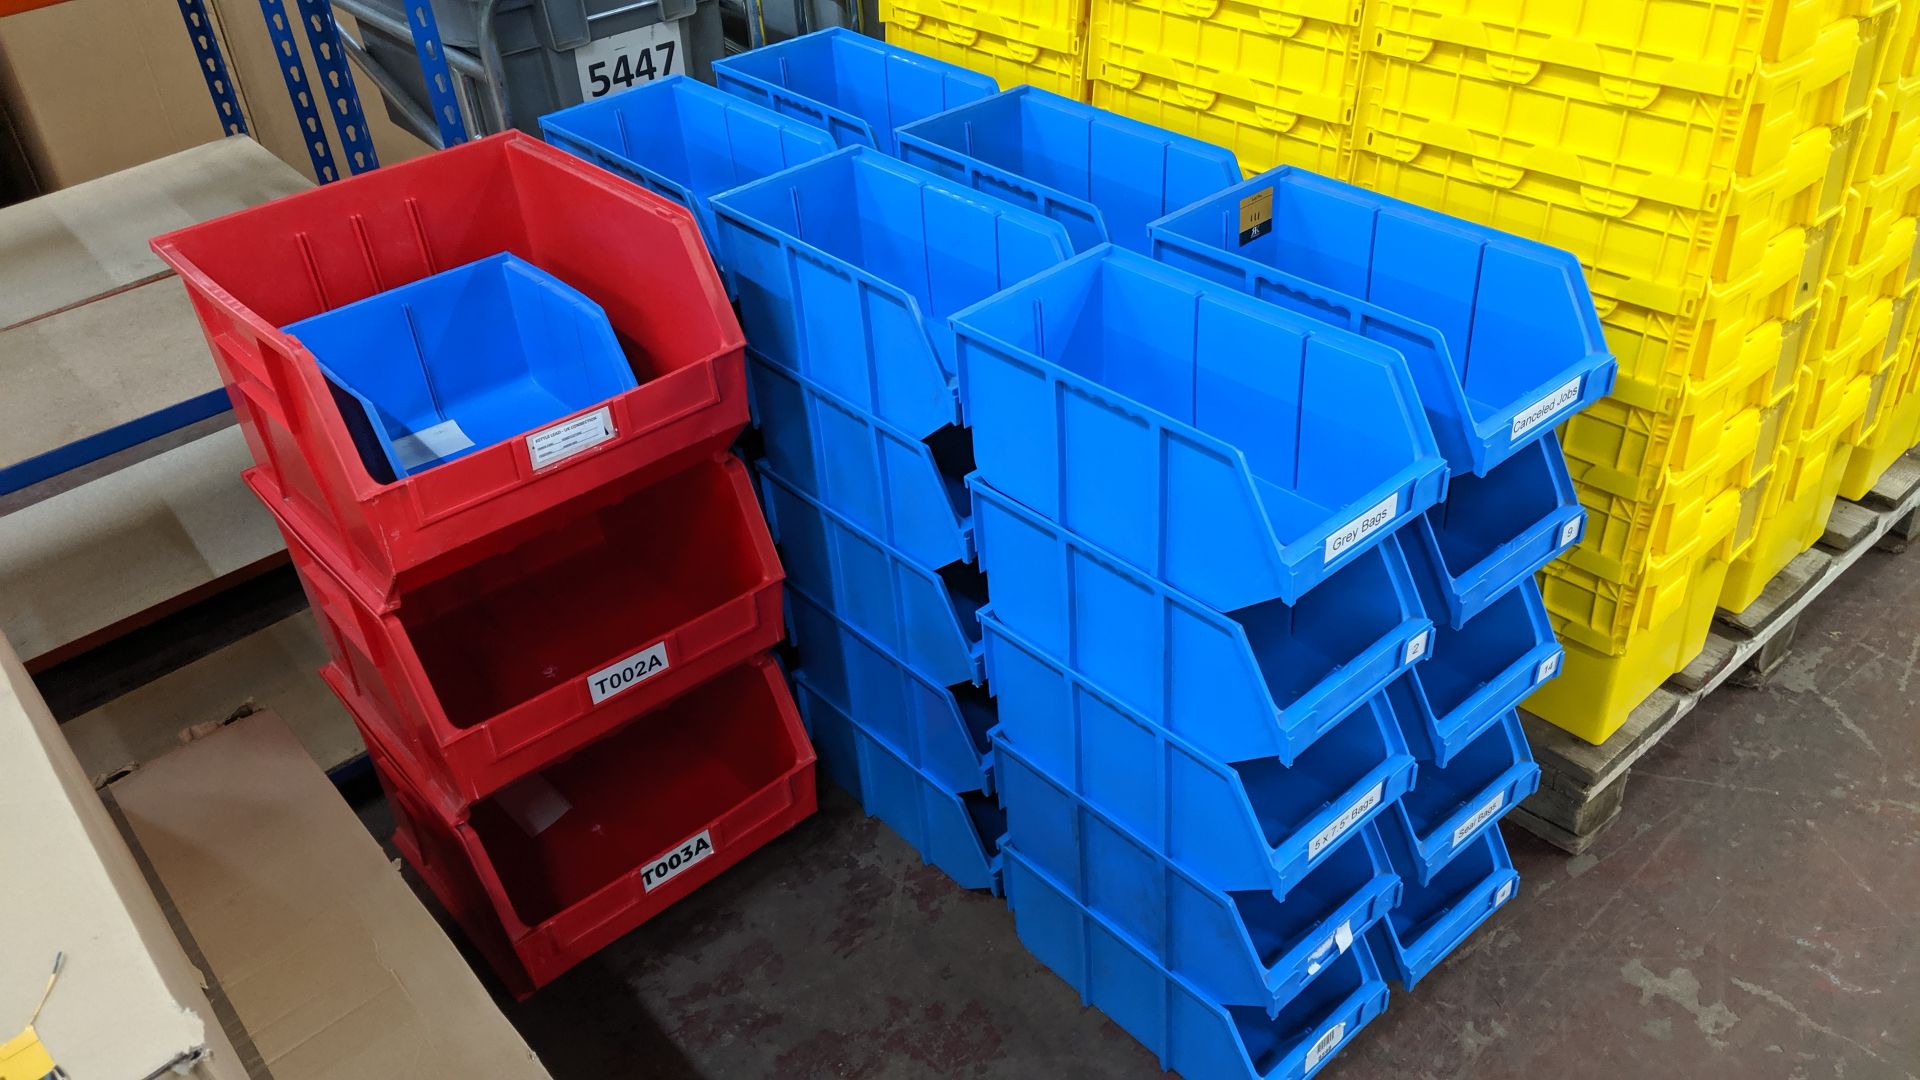 Quantity of lin bin type storage units comprising 30 blue bins each measuring approx. 8" x 15", 3 in